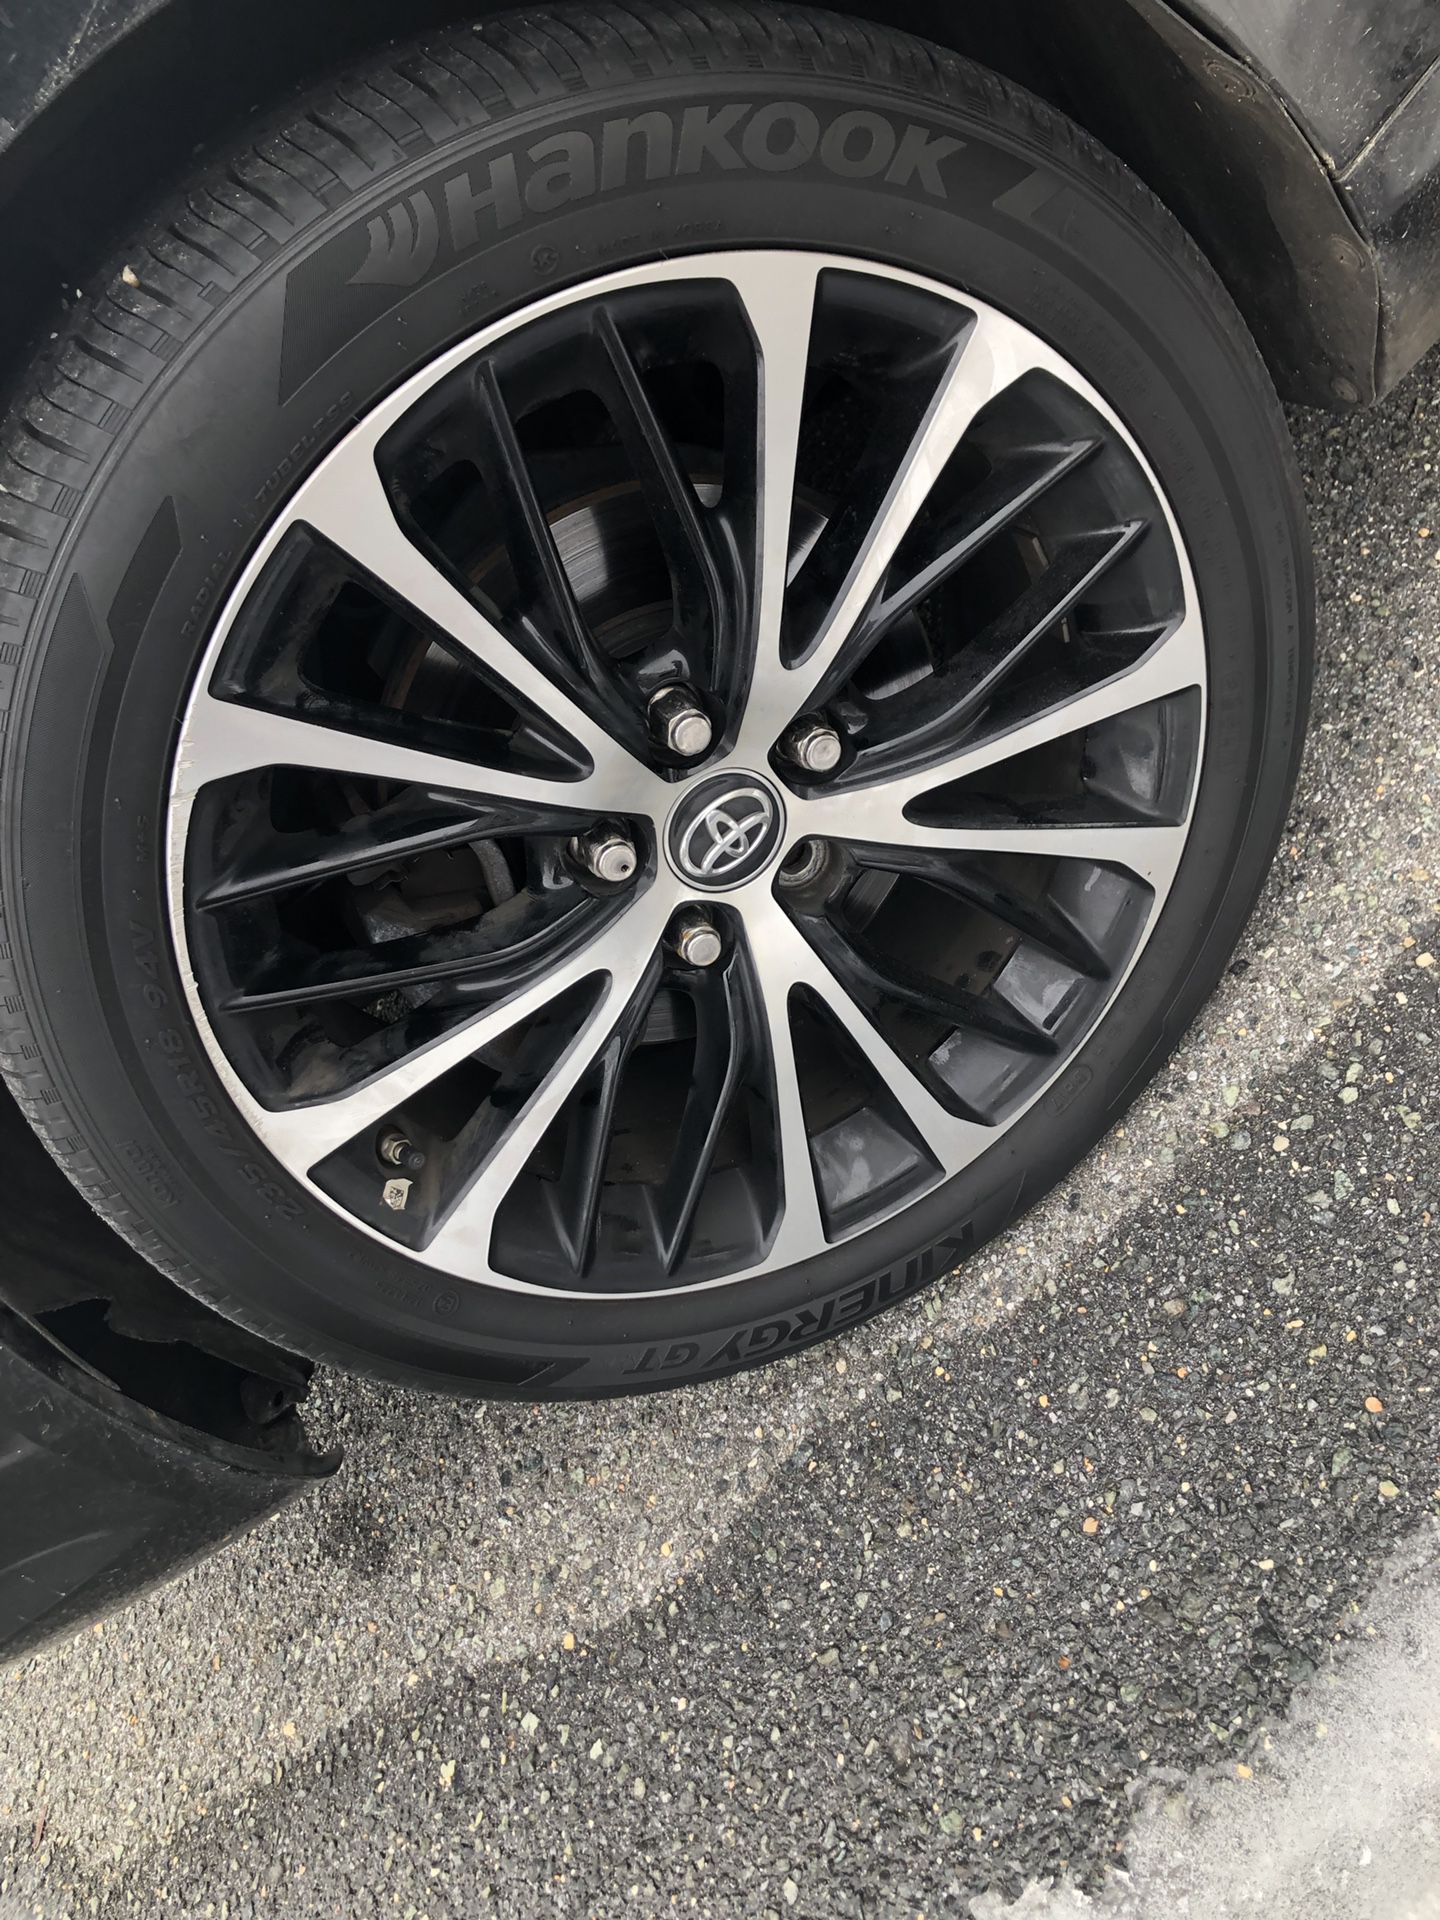 Toyota Camry sport size 18 fresh rim and new tires